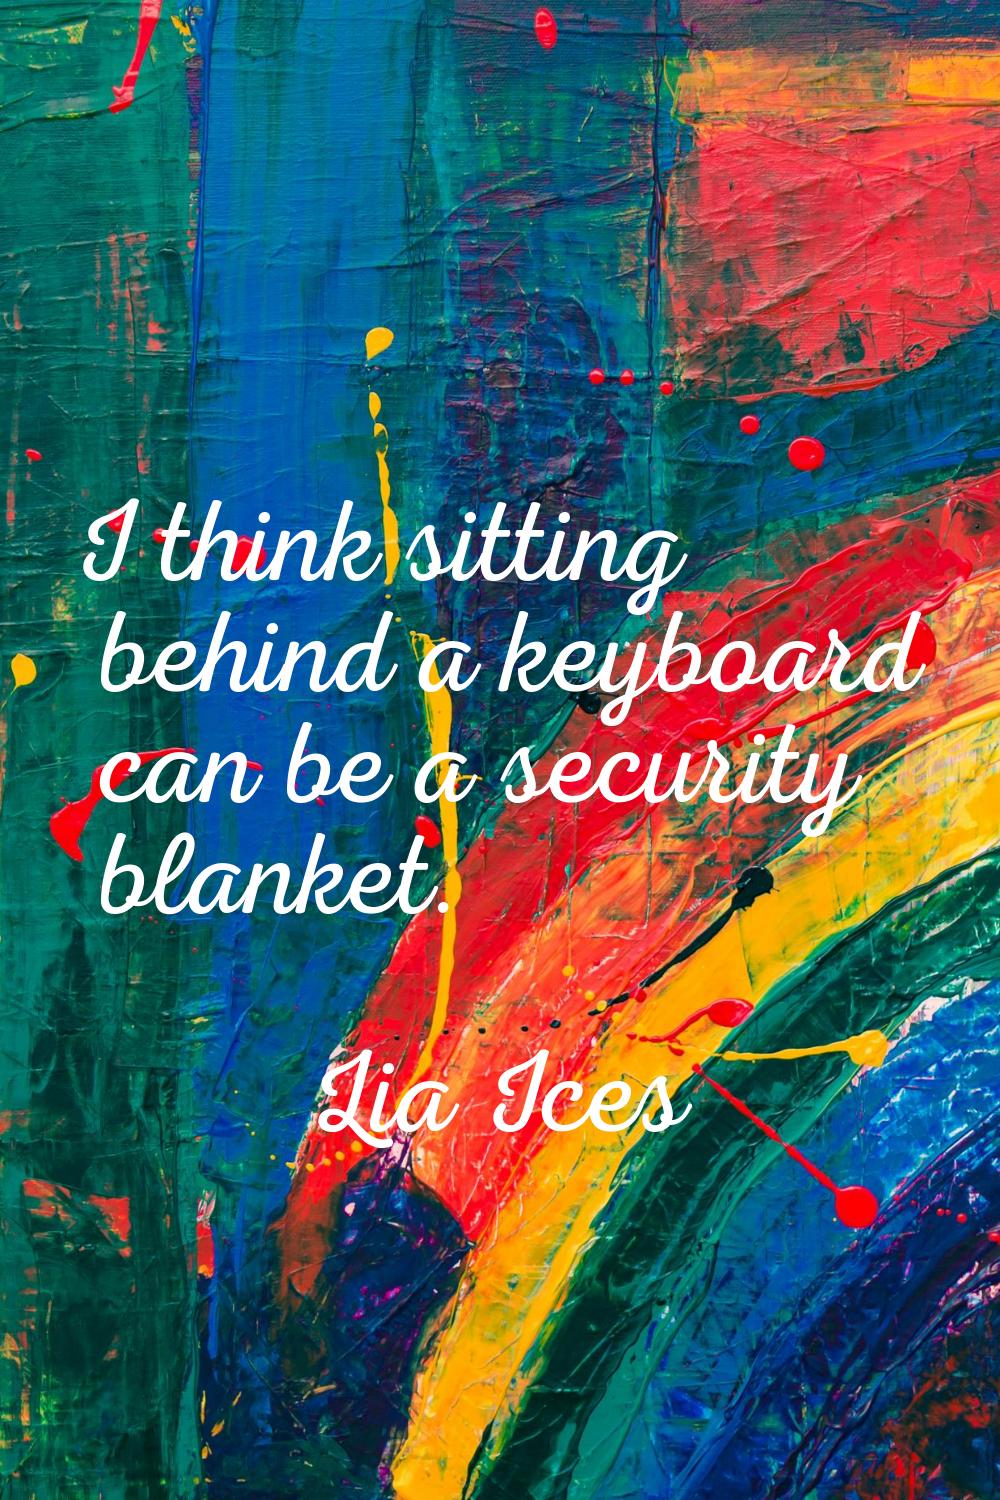 I think sitting behind a keyboard can be a security blanket.